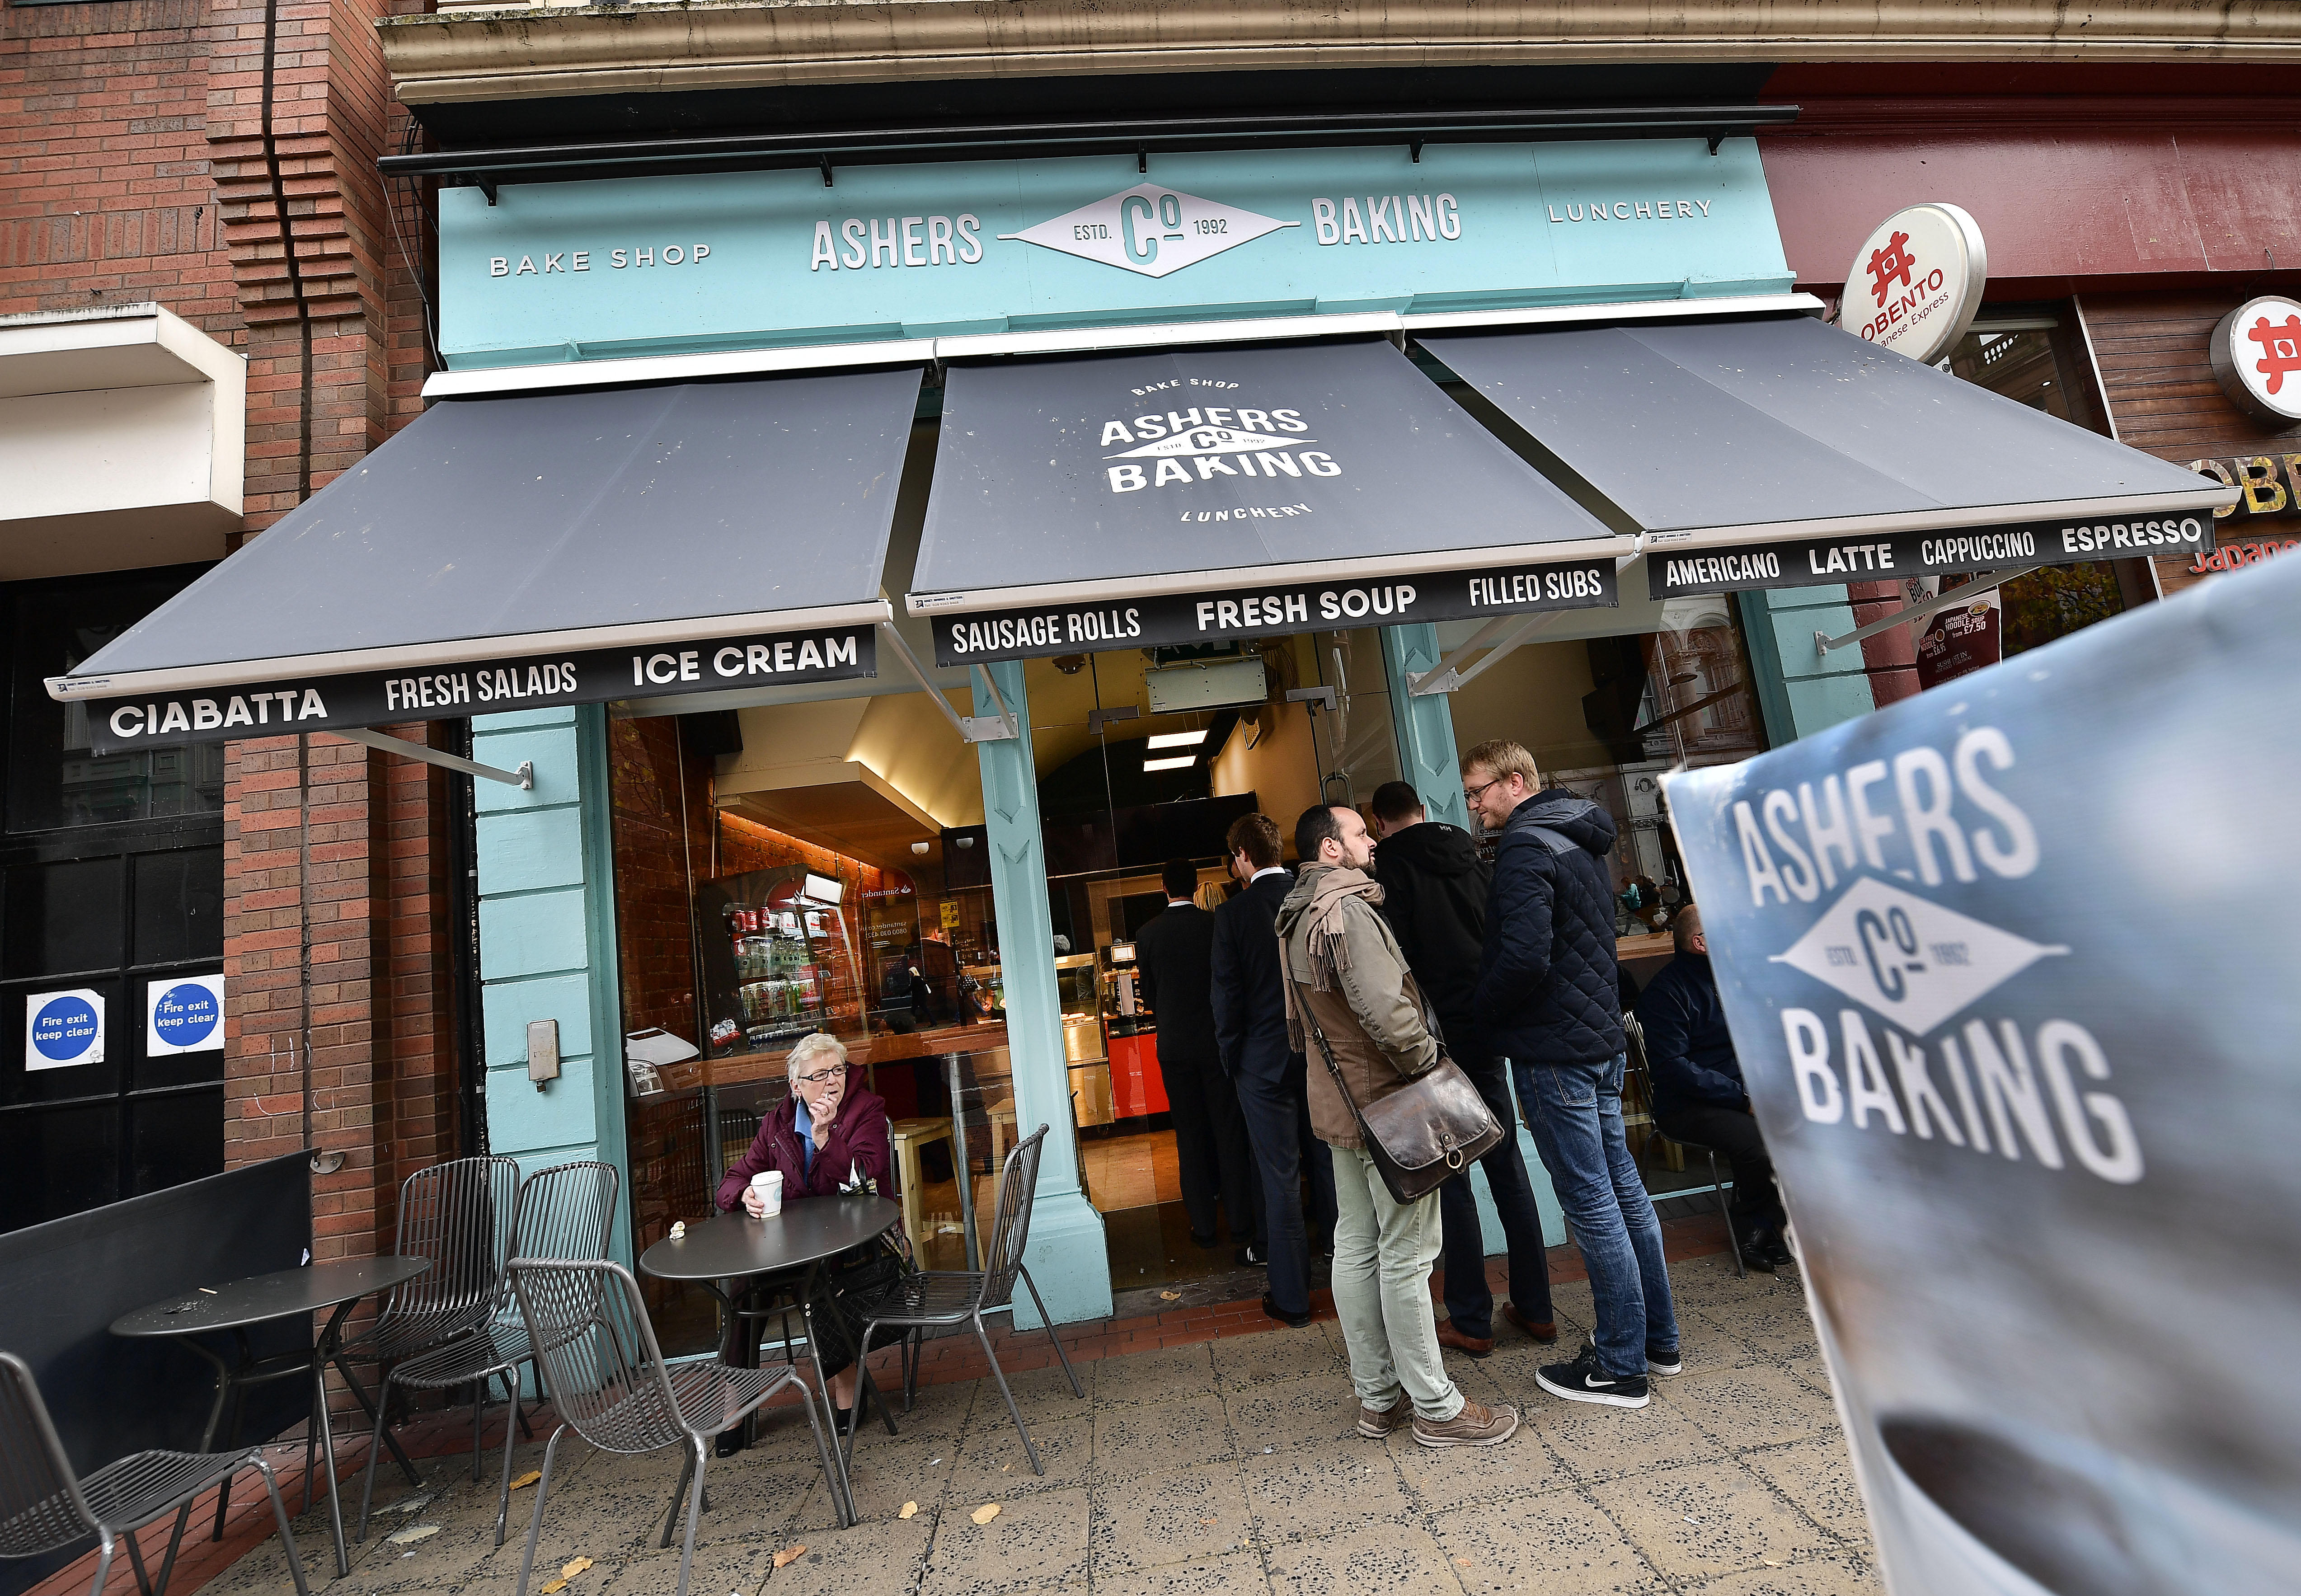 Gay Cake Case Ruling By Britain S Supreme Court Finds In Favor Of Ashers Baking Co Cbs News